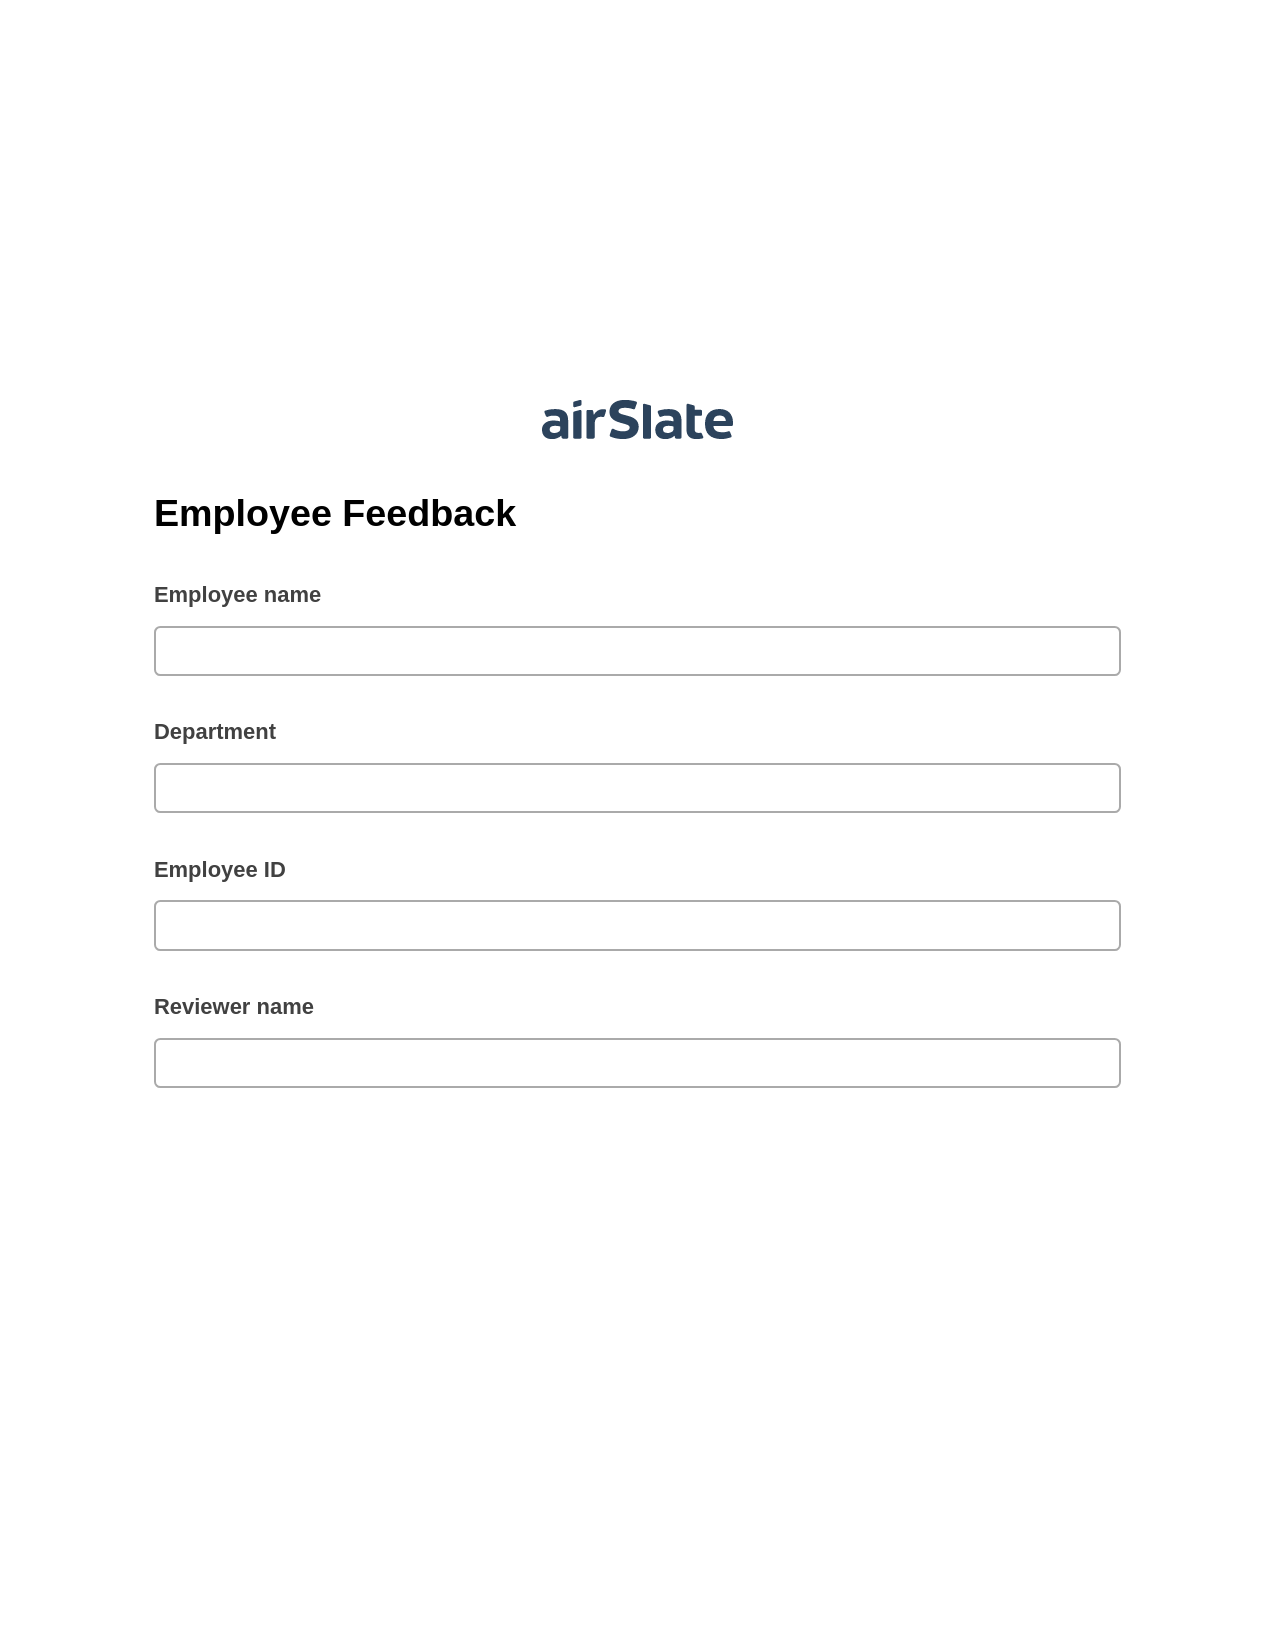 Multirole Employee Feedback Pre-fill from CSV File Bot, Unassign Role Bot, OneDrive Bot